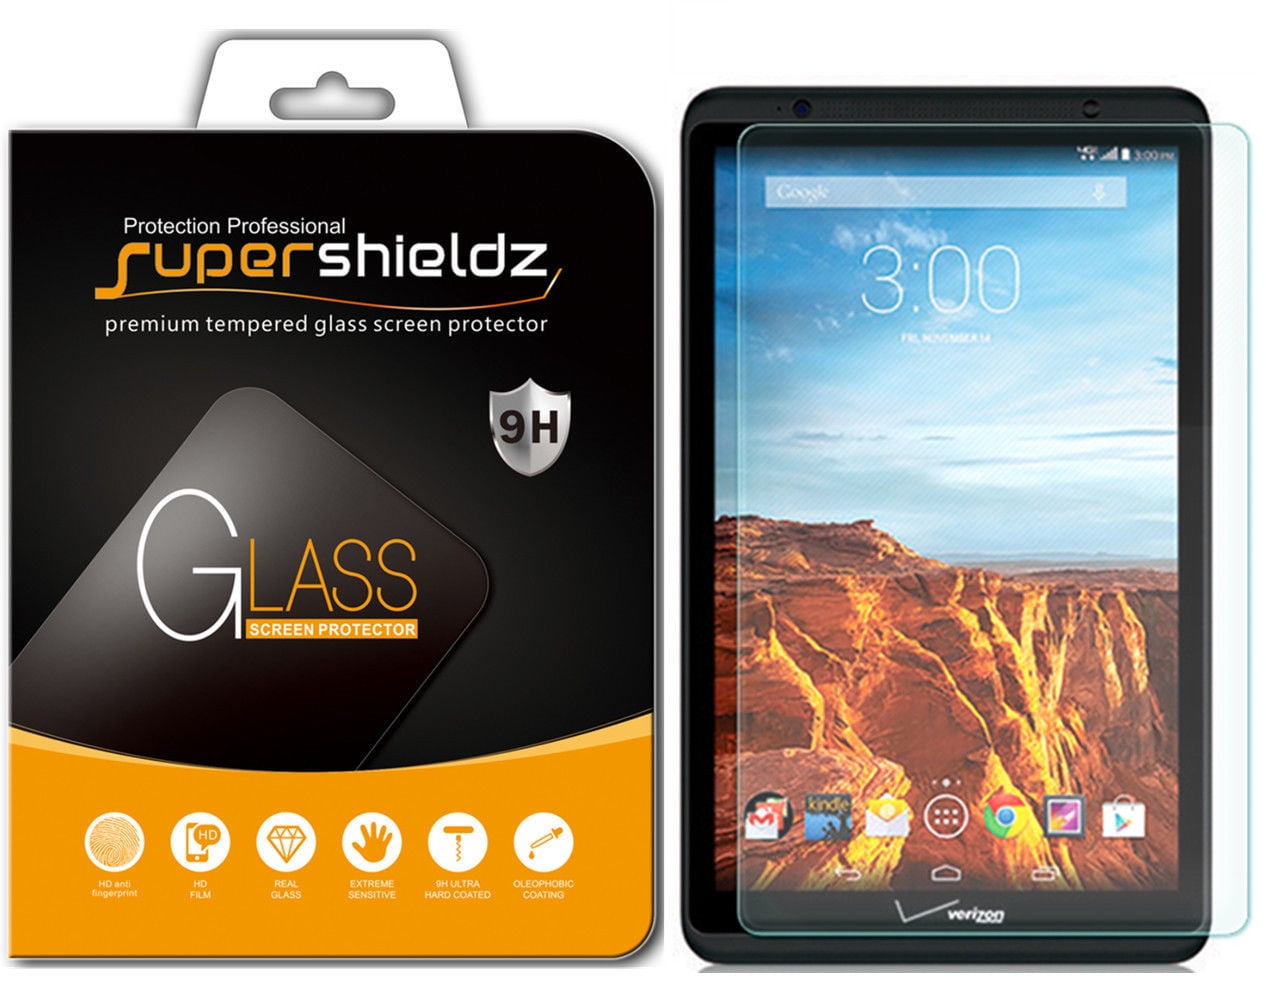 Supershieldz Tempered Glass Screen Protector for AT&T Primetime 